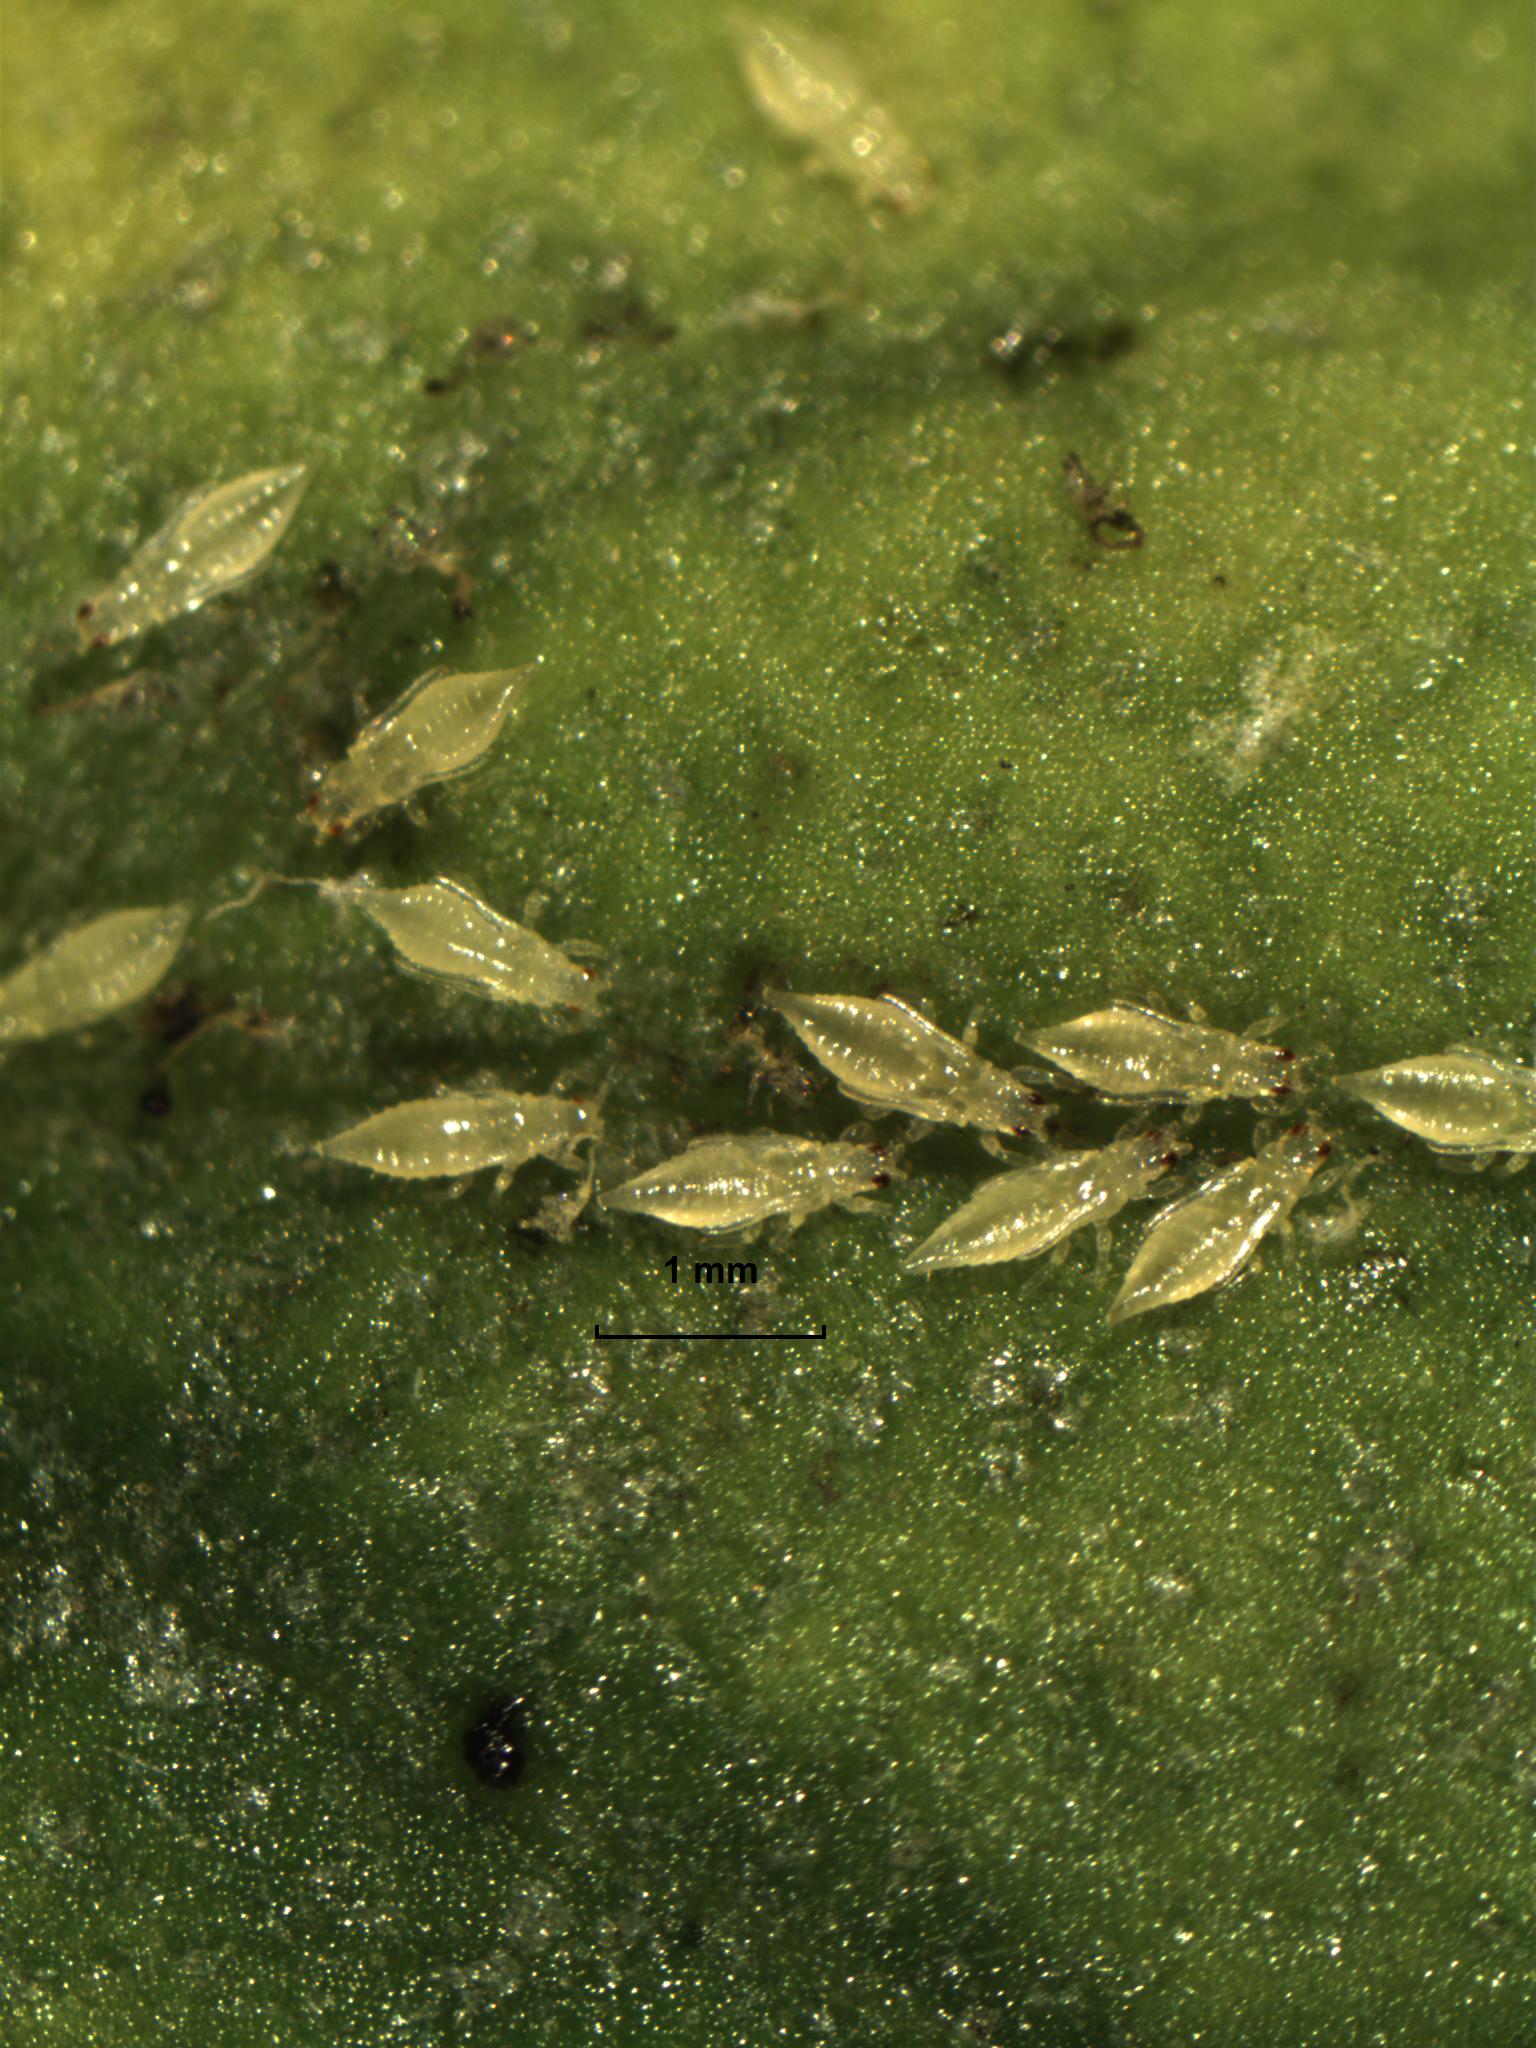 Pupae of the greenhouse thrips on leaf